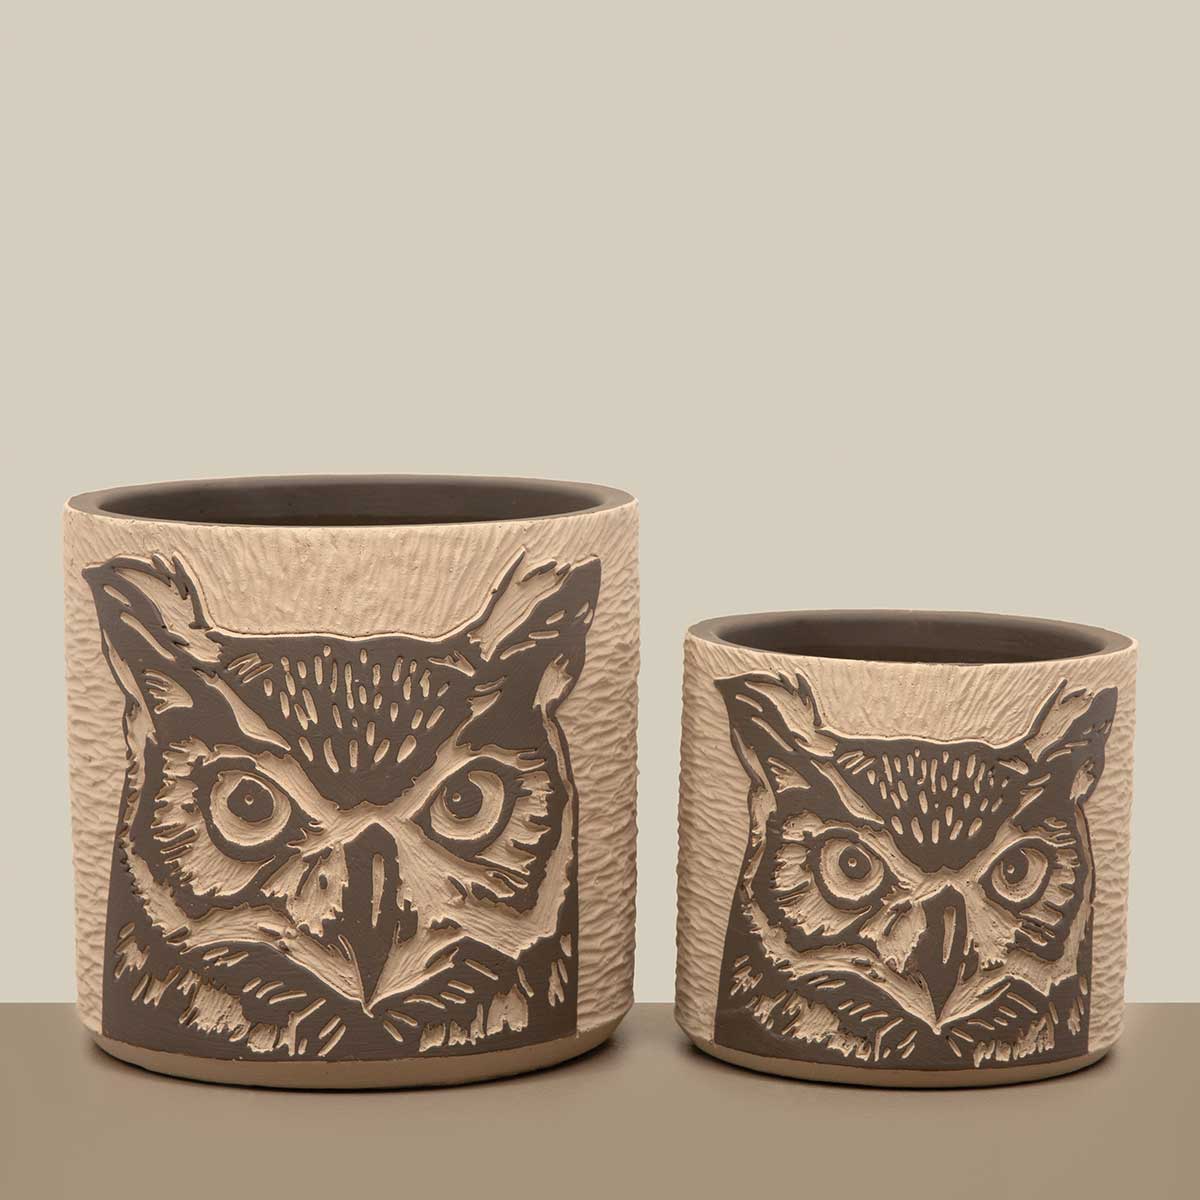 POT BARNYARD OWL LARGE 5.5IN X 5IN BROWN/BEIGE CONCRETE - Click Image to Close